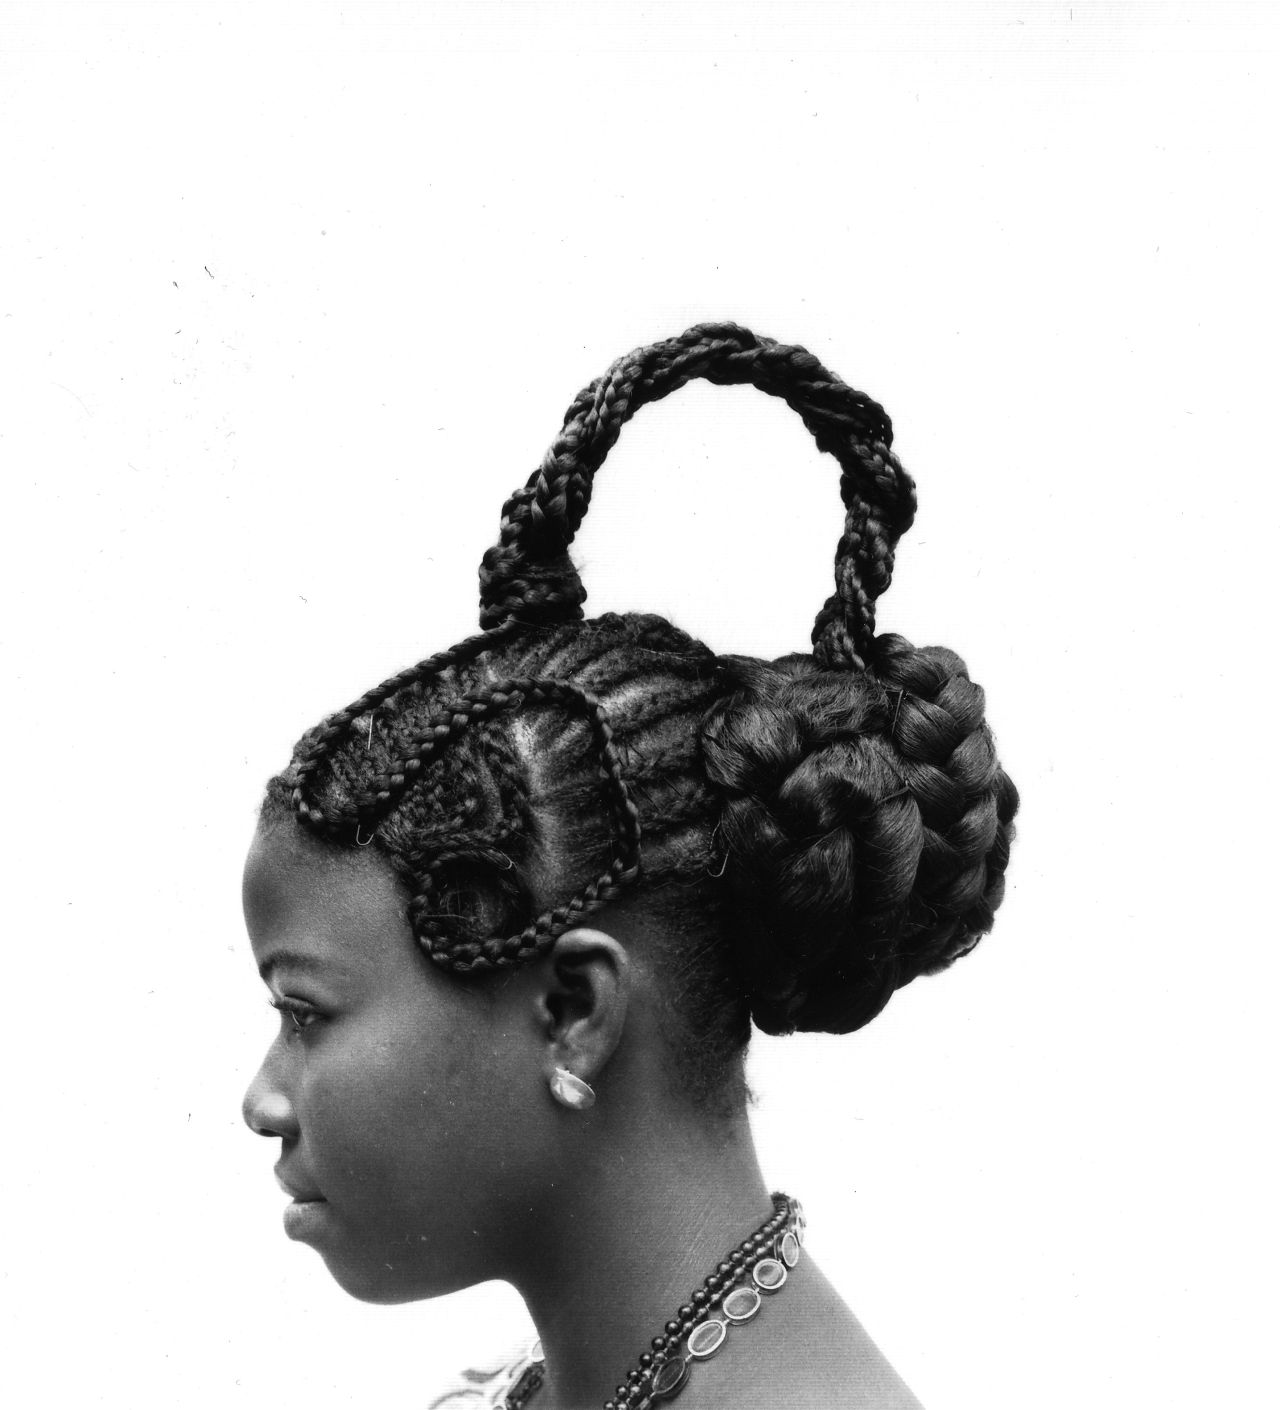 Abebe, 1975. These images of Nigerian hairstyles were taken by world-renowned photographer J. D. 'Okhai Ojeikere. He travelled the streets of 1960s Lagos with his Brownie D camera, capturing the intricately designed hairstyles of his fellow country people. 